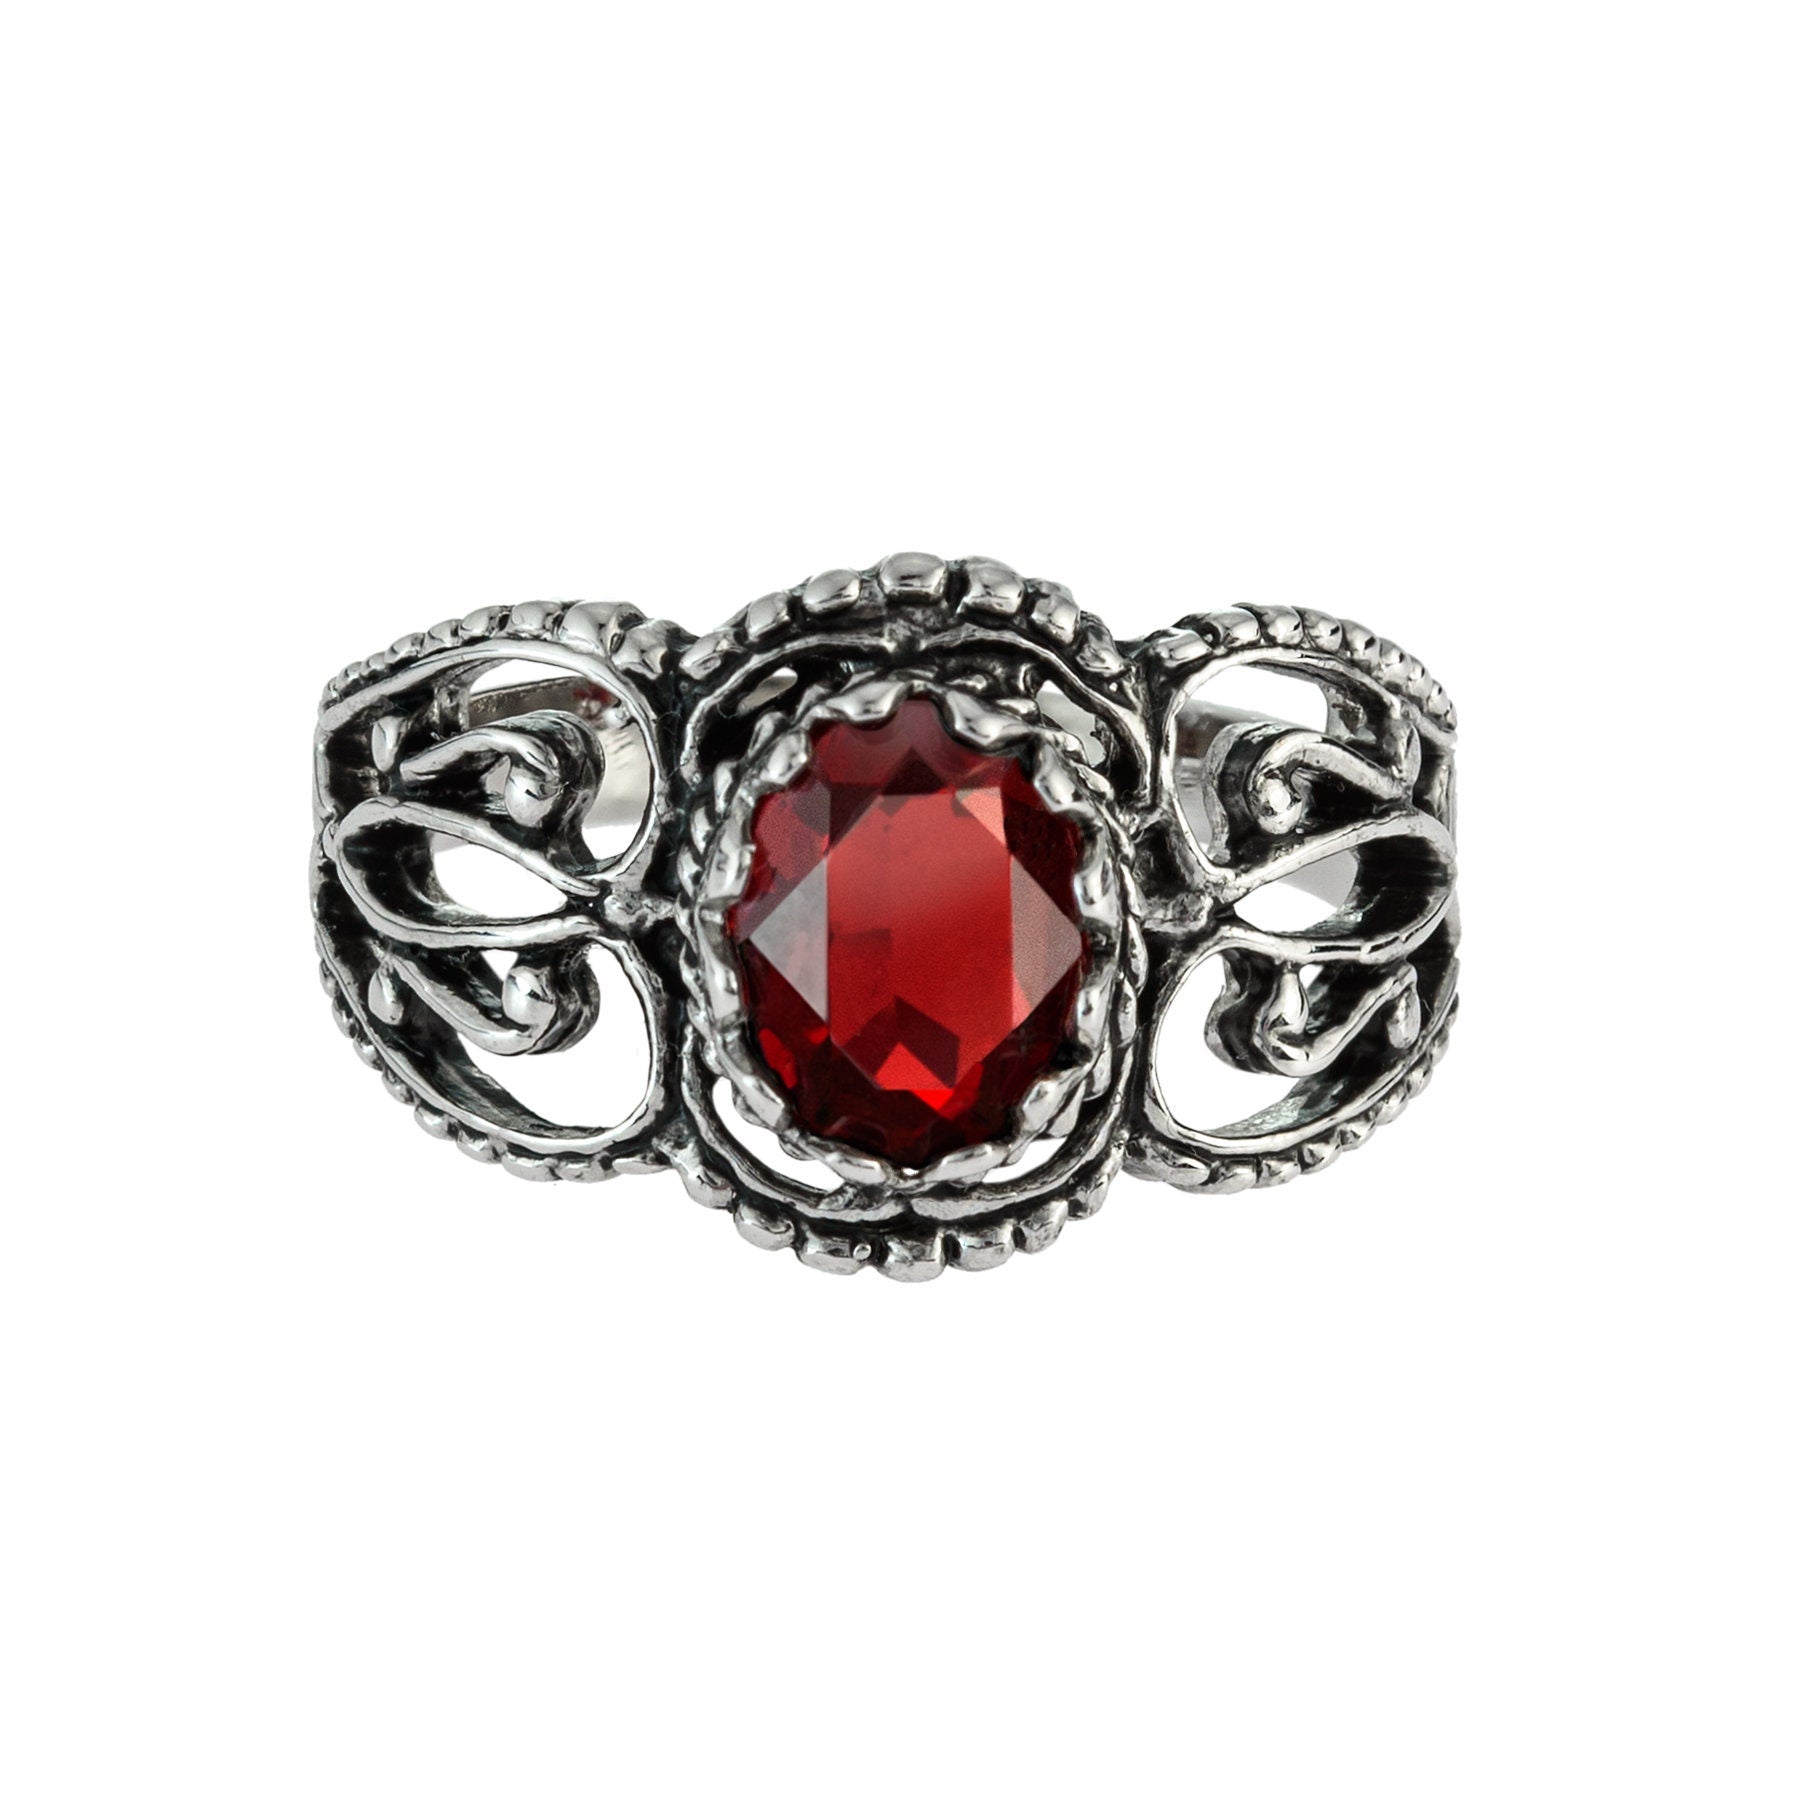 Vintage Ring Ruby Crystal Filigree Ring Antique 18k White Gold Silver R142 Womans Jewelry - Limited Stock - Never Worn